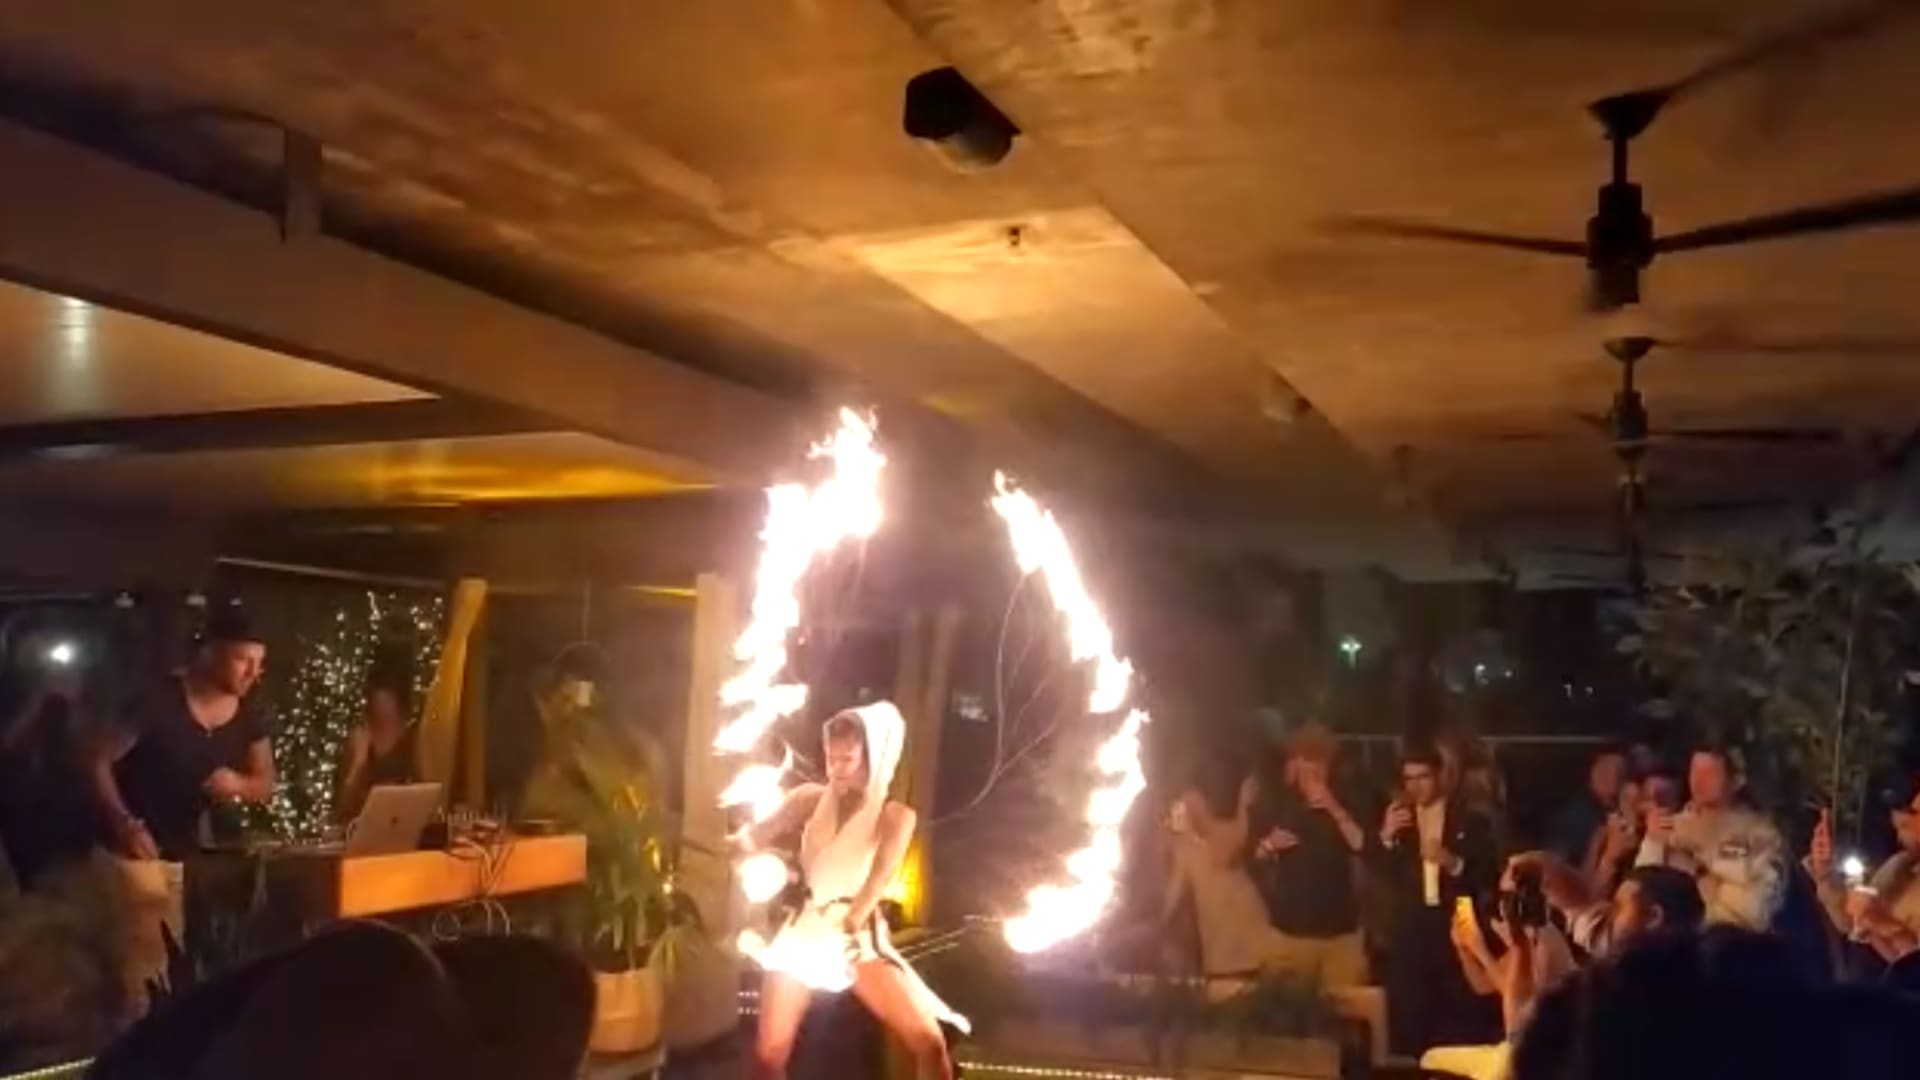 Fire dancers entertain crypto enthusiasts at a rooftop party in Miami.